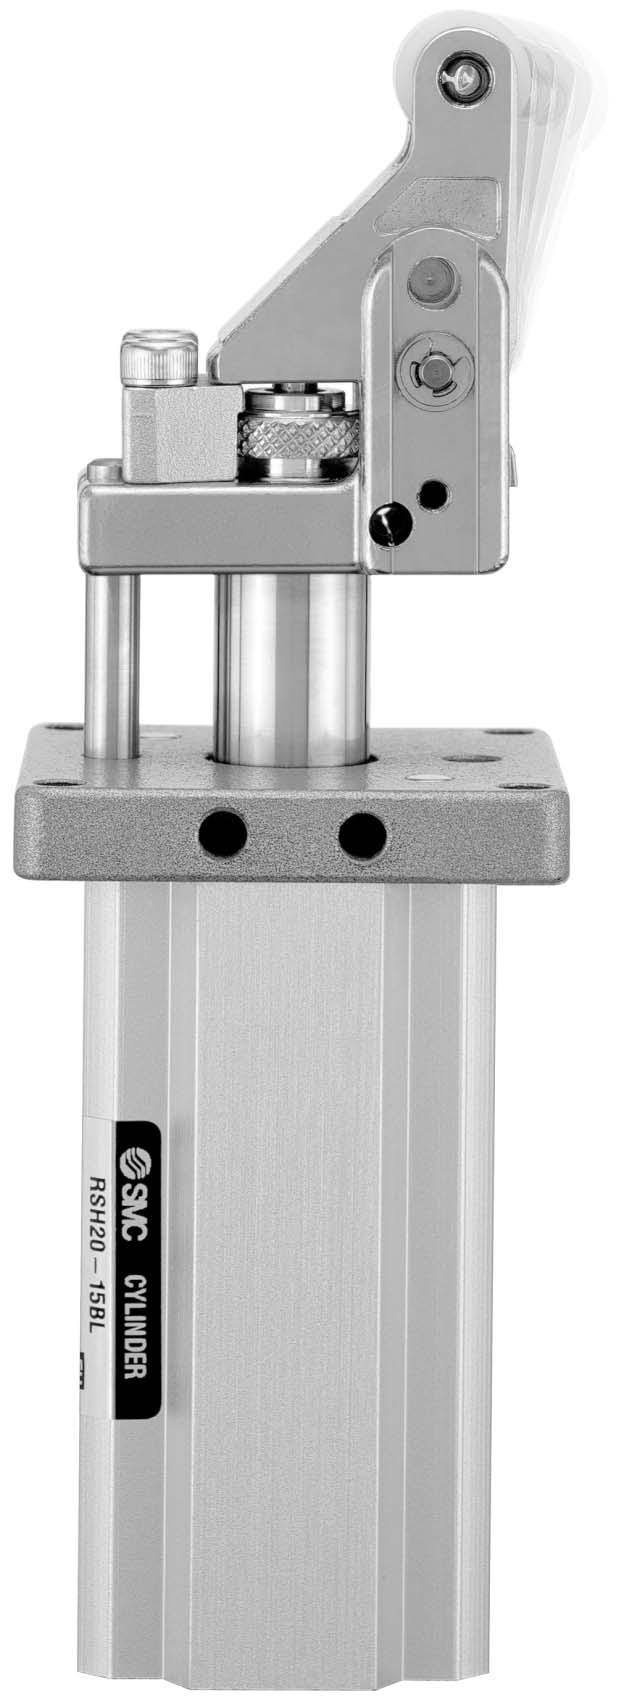 2 eavy Duty Stopper Cylinder Series RS/RS1 ø, ø ø, ø, ø 3 The roller lever direction can be changed in 90 steps.